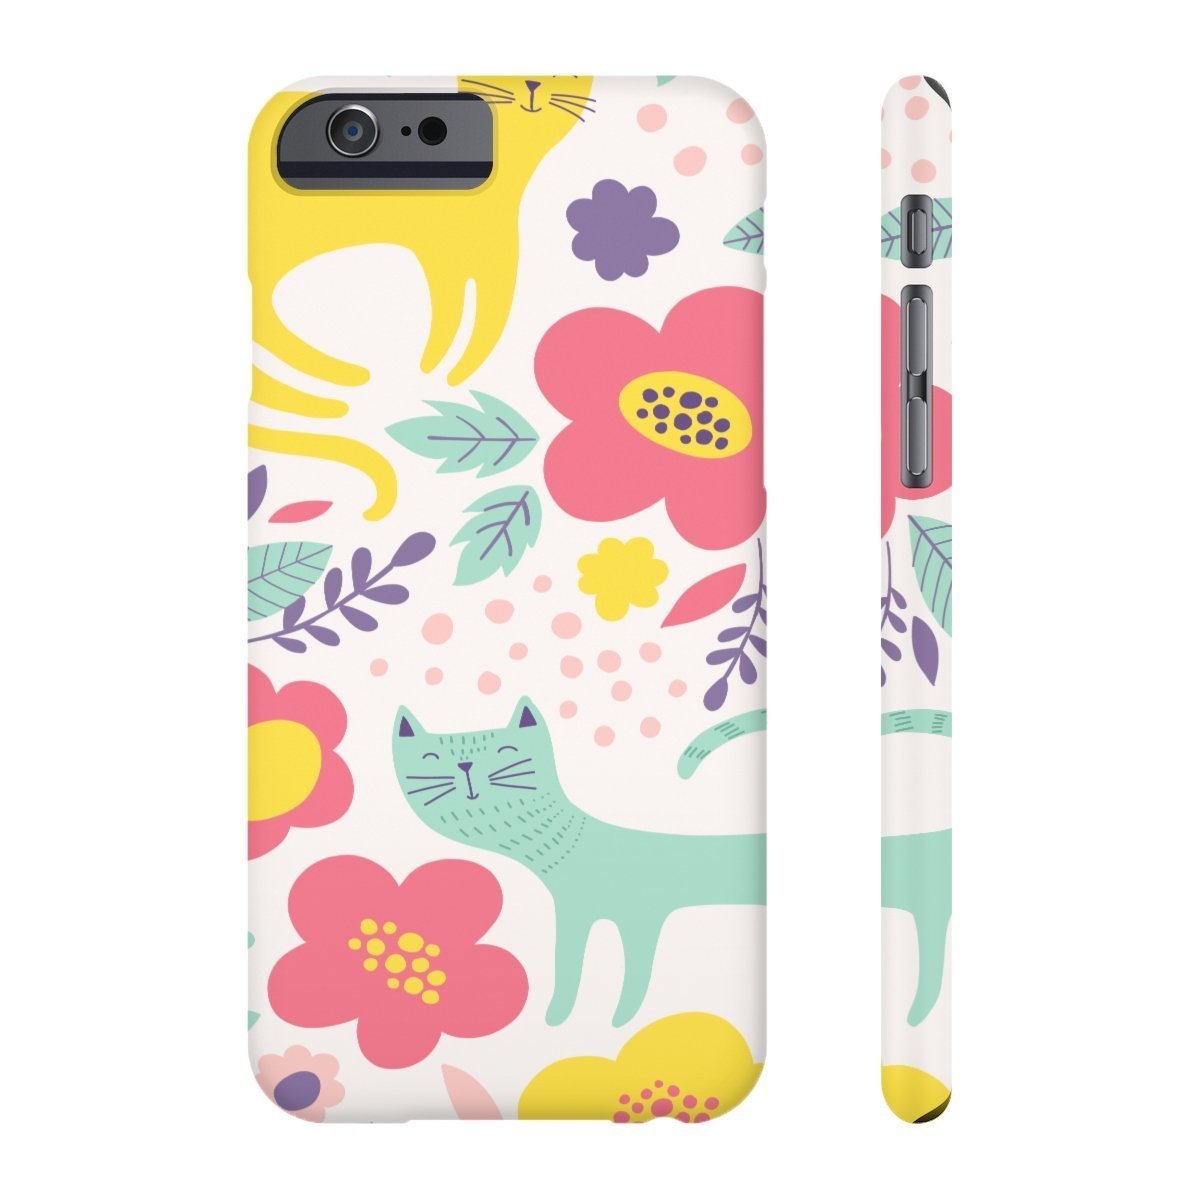 Gifts for Cat Lovers, Unique Cat Phone Case Printed with Cats and Flowers